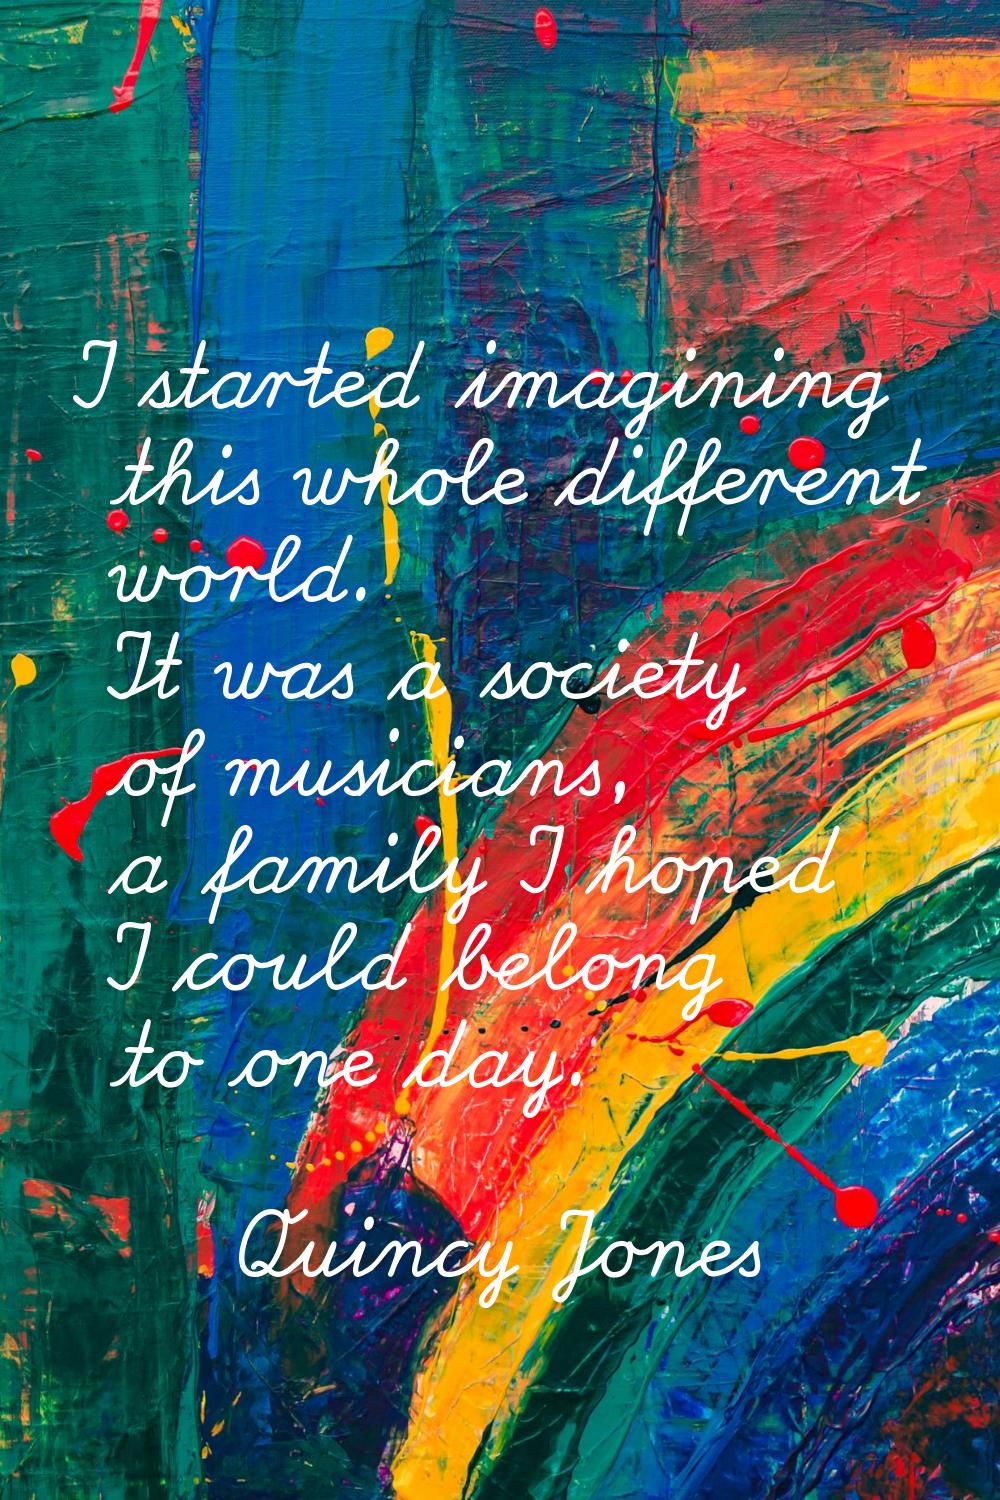 I started imagining this whole different world. It was a society of musicians, a family I hoped I c